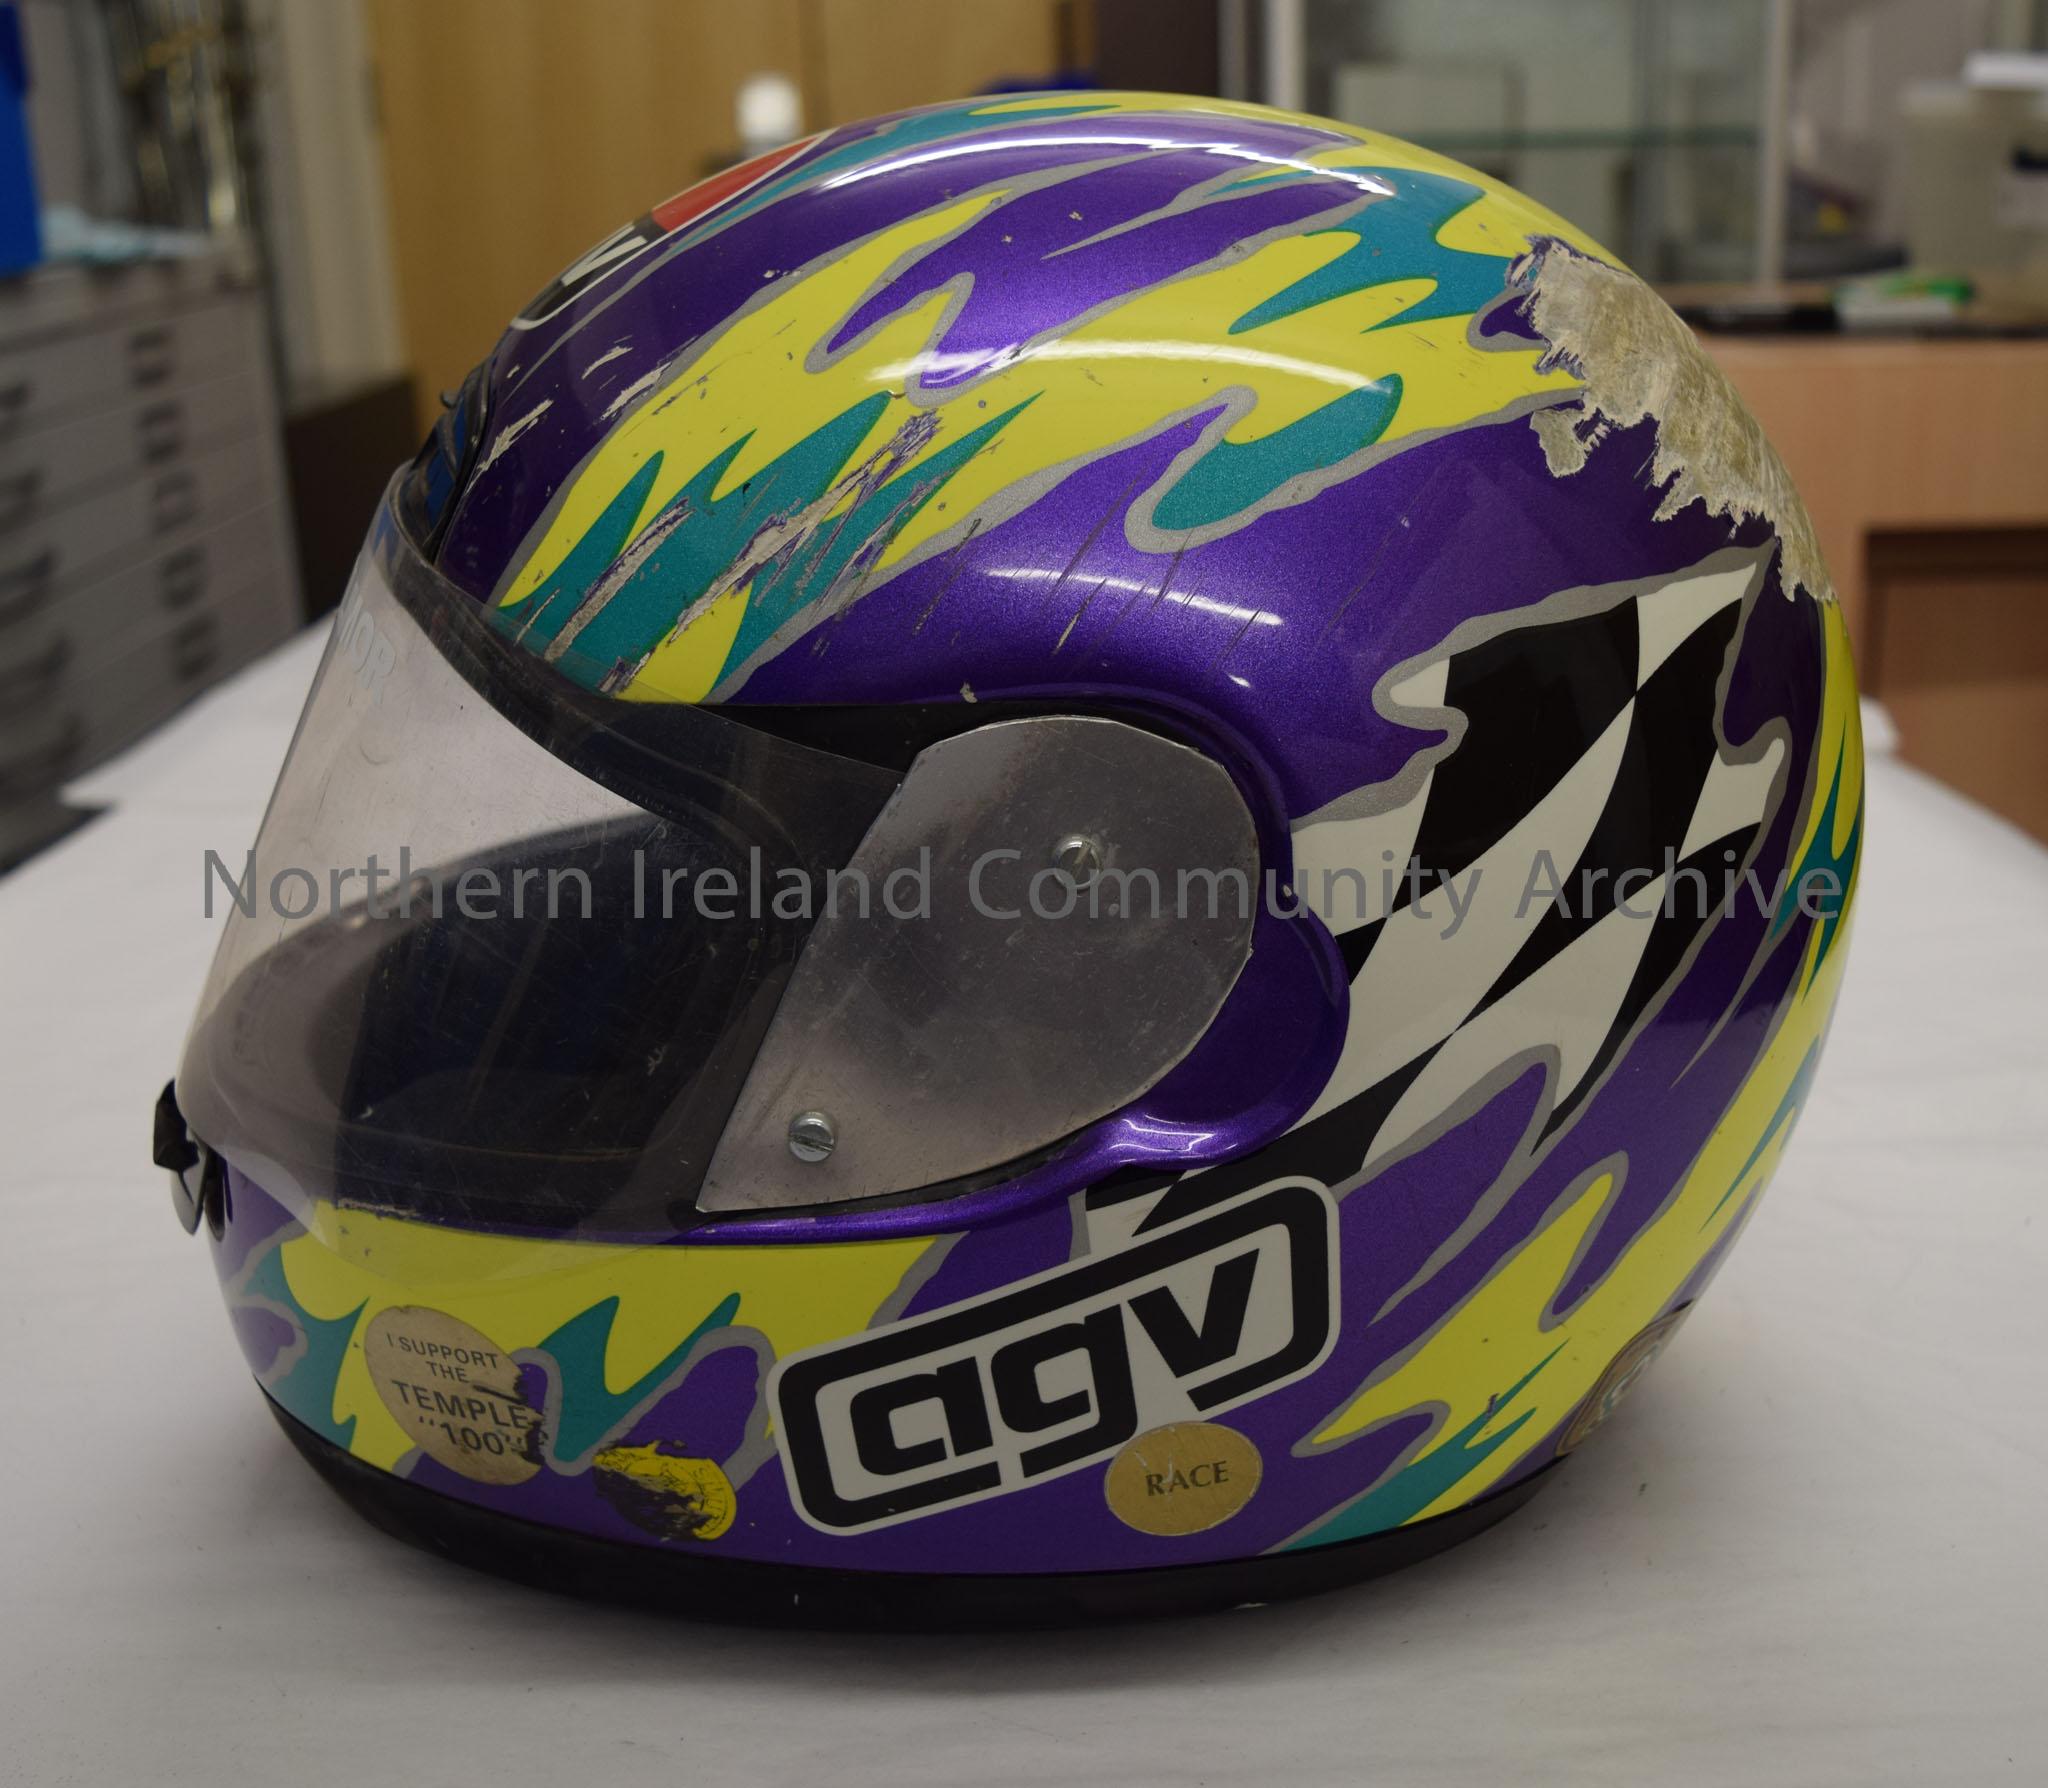 AGV motorcycle helmet belonging to Victor Gilmore. Purple with green and yellow pattern throughout and small section of black and white chequered patt… – 2016.53 (3)